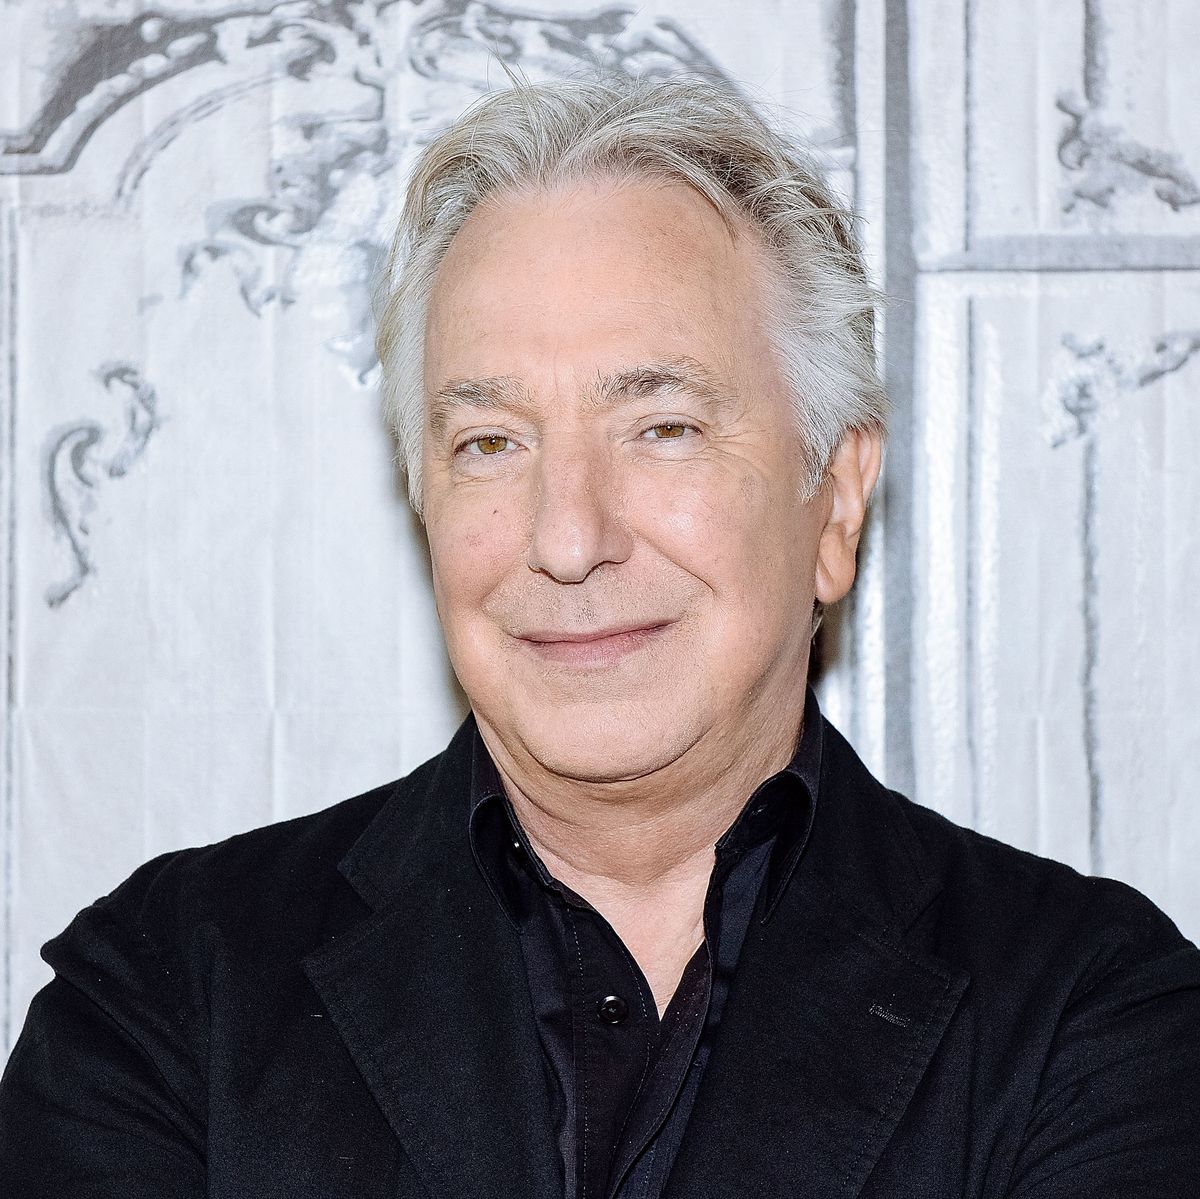 AOL BUILD Speaker Series Presents: Alan RickmanNEW YORK, NY - JUNE 19: Actor Alan Rickman attends the AOL Build Speaker Series at AOL Studios In New York on June 19, 2015 in New York City. (Photo by Grant Lamos IV/Getty Images)